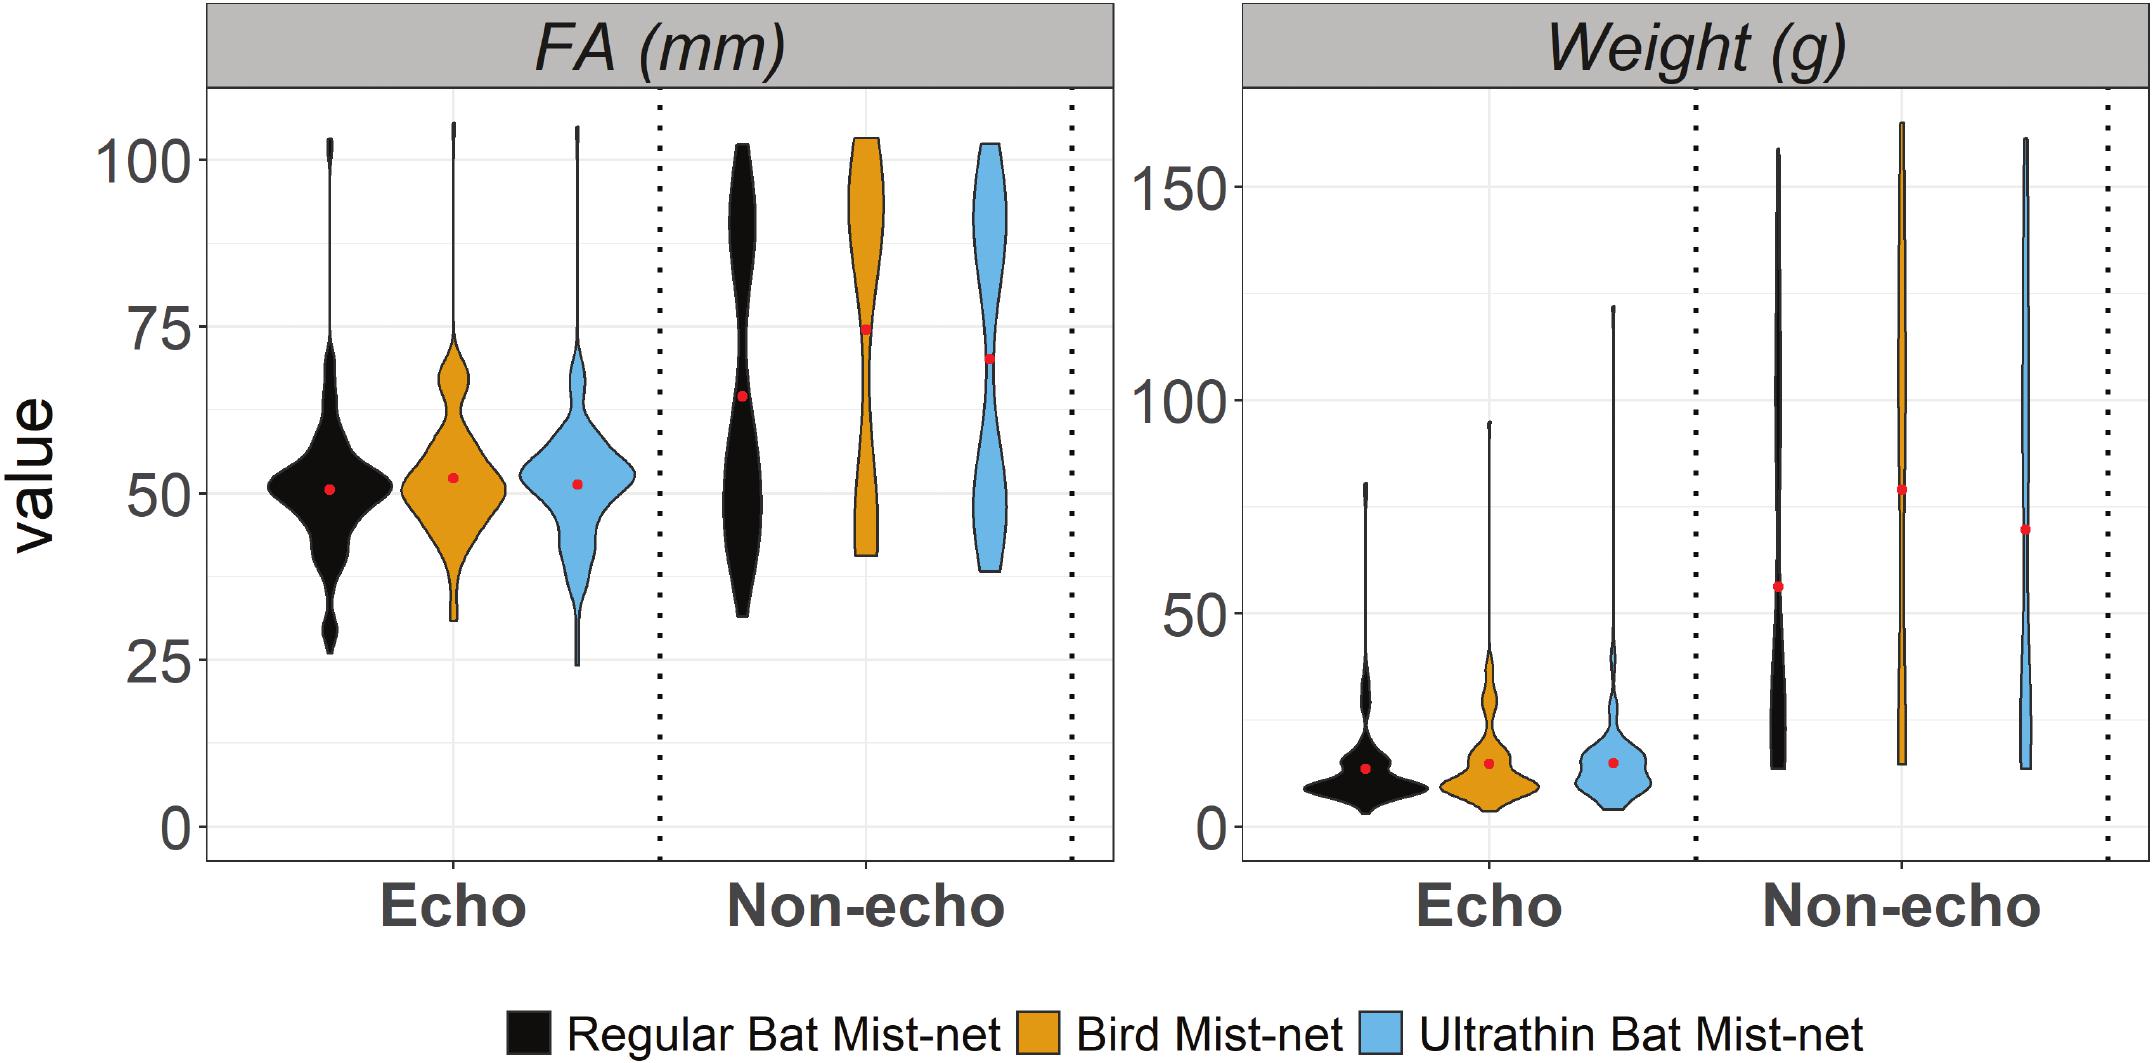 Are bat mist nets ideal for capturing bats? From ultrathin to bird